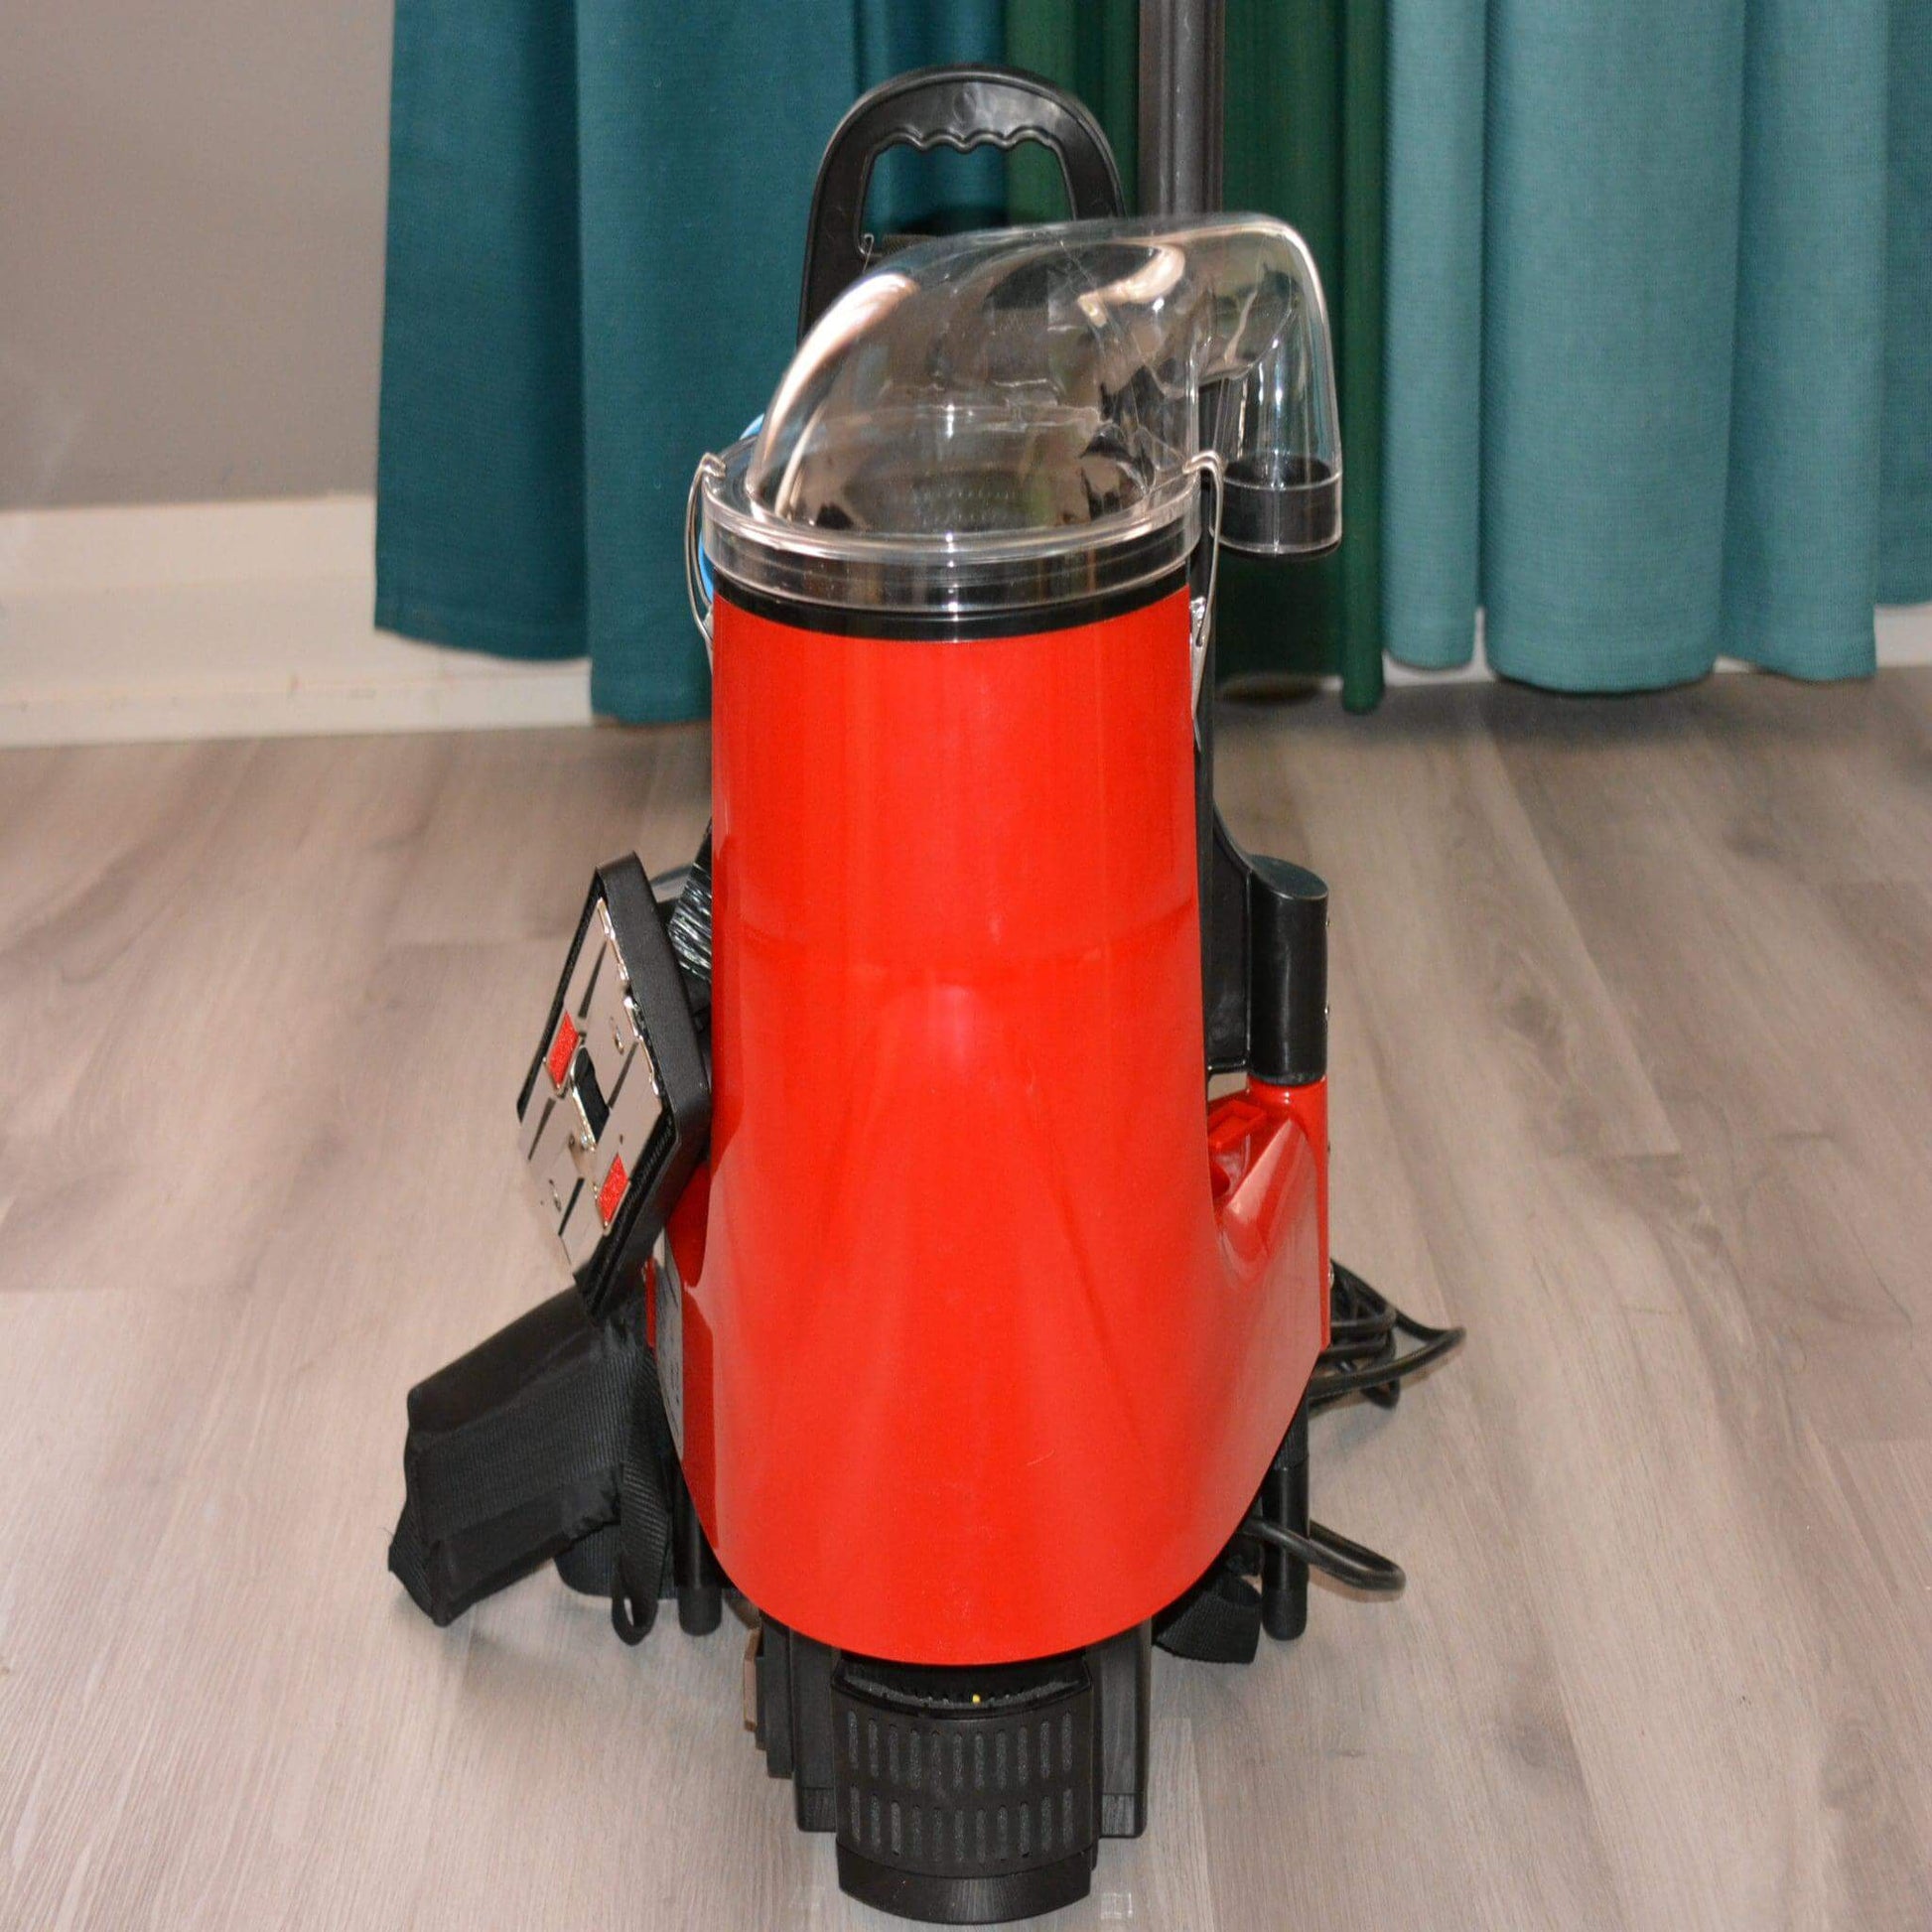 Backpack Vacuum-t includes specialized tools for cracks, corners, and upholstery- Order now!